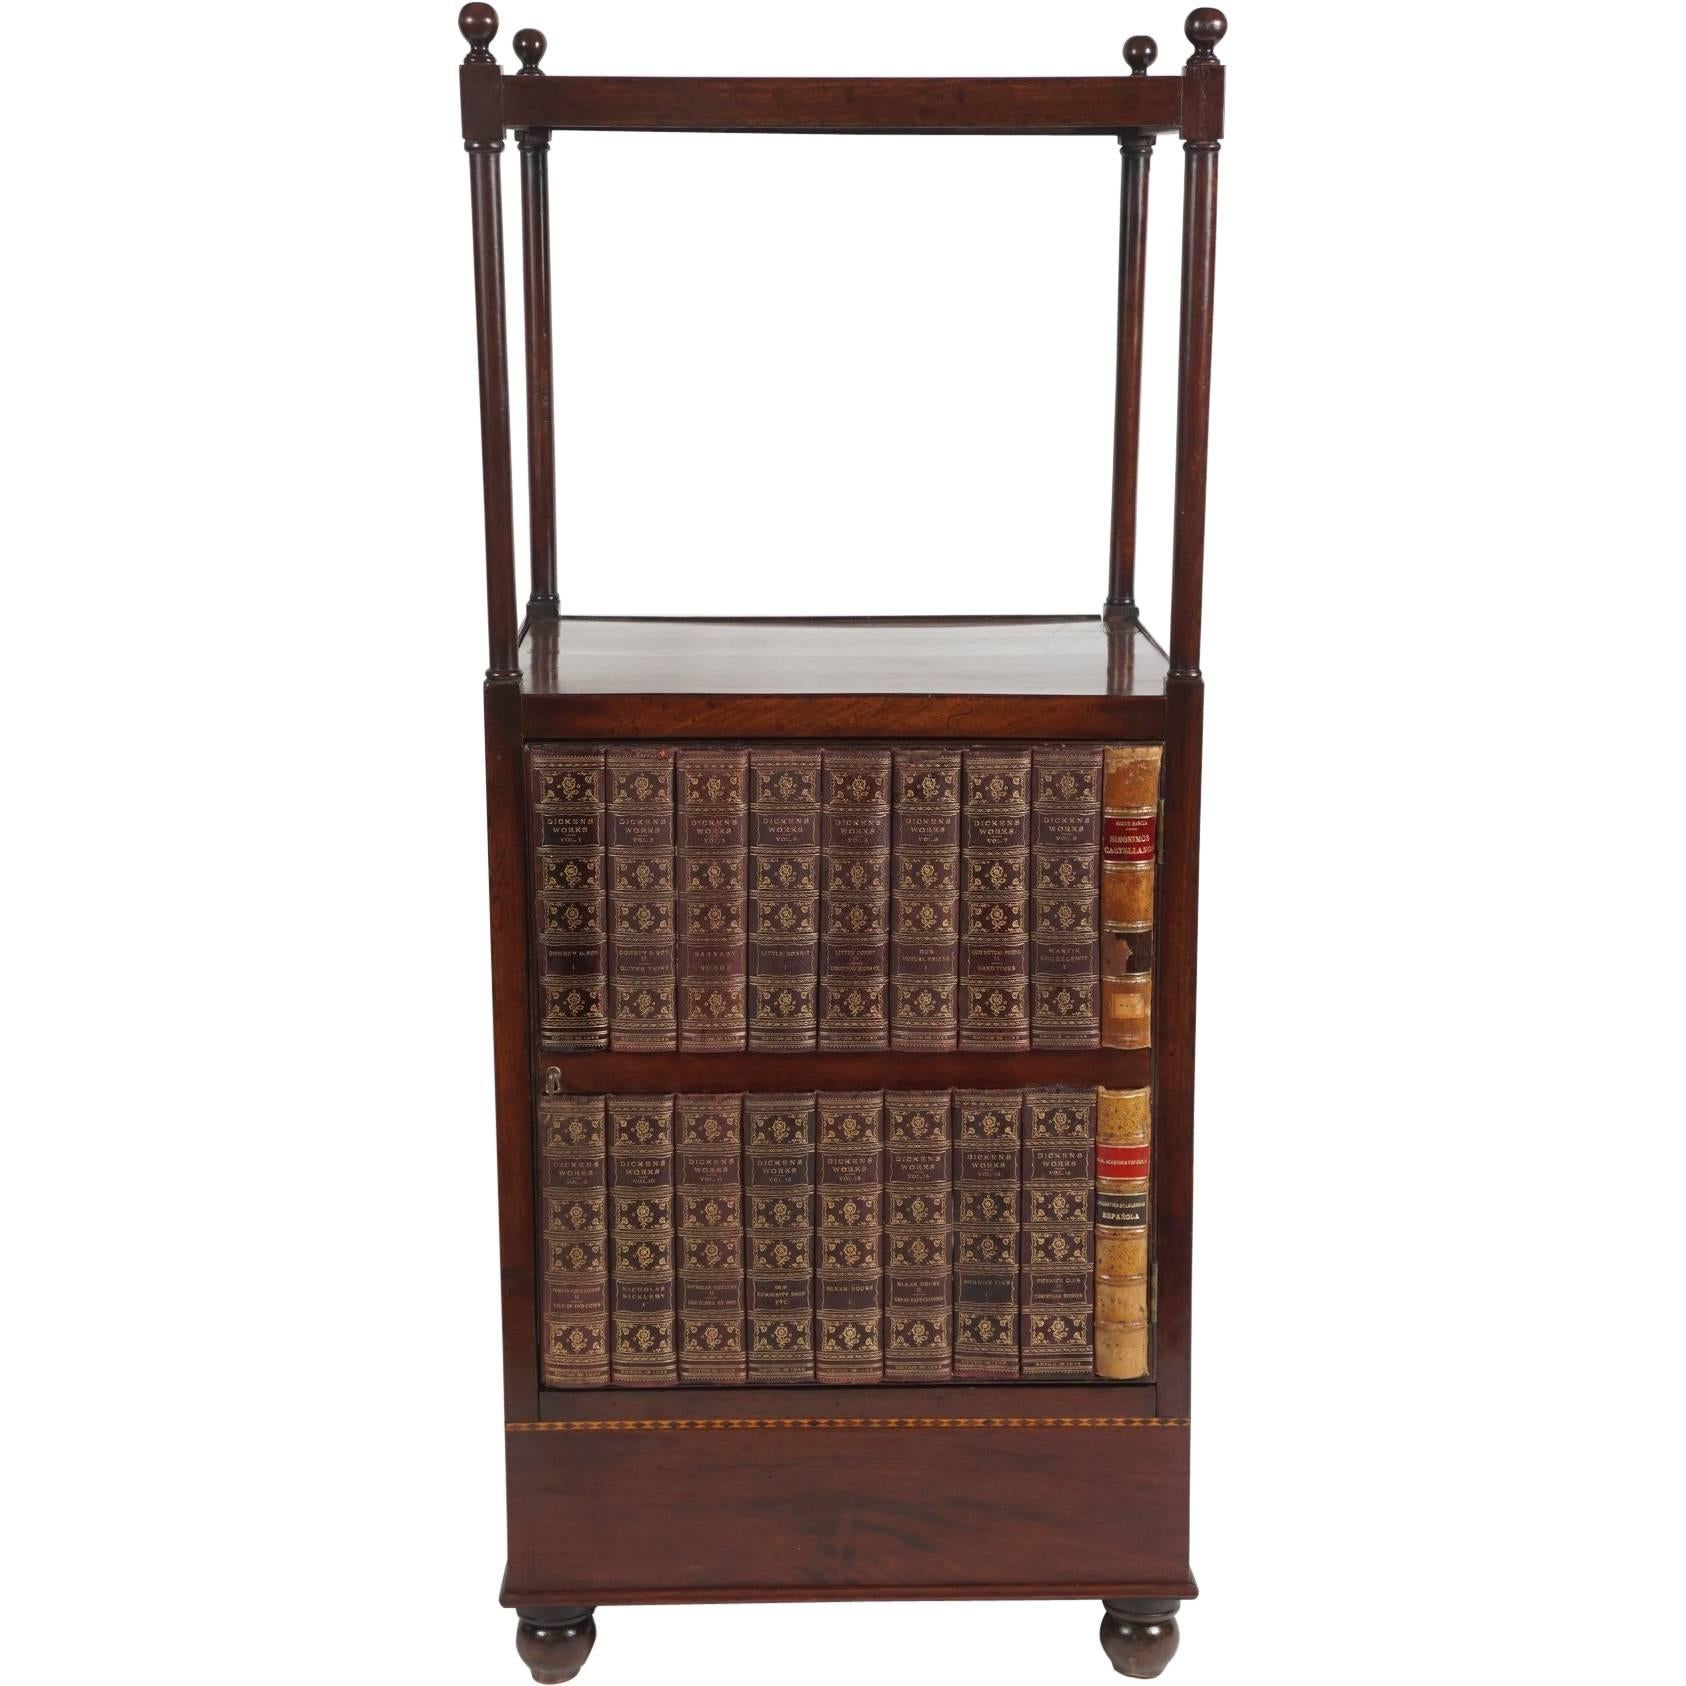 English Regency Period Mahogany Étagère or Library Stand, circa 1815 For Sale